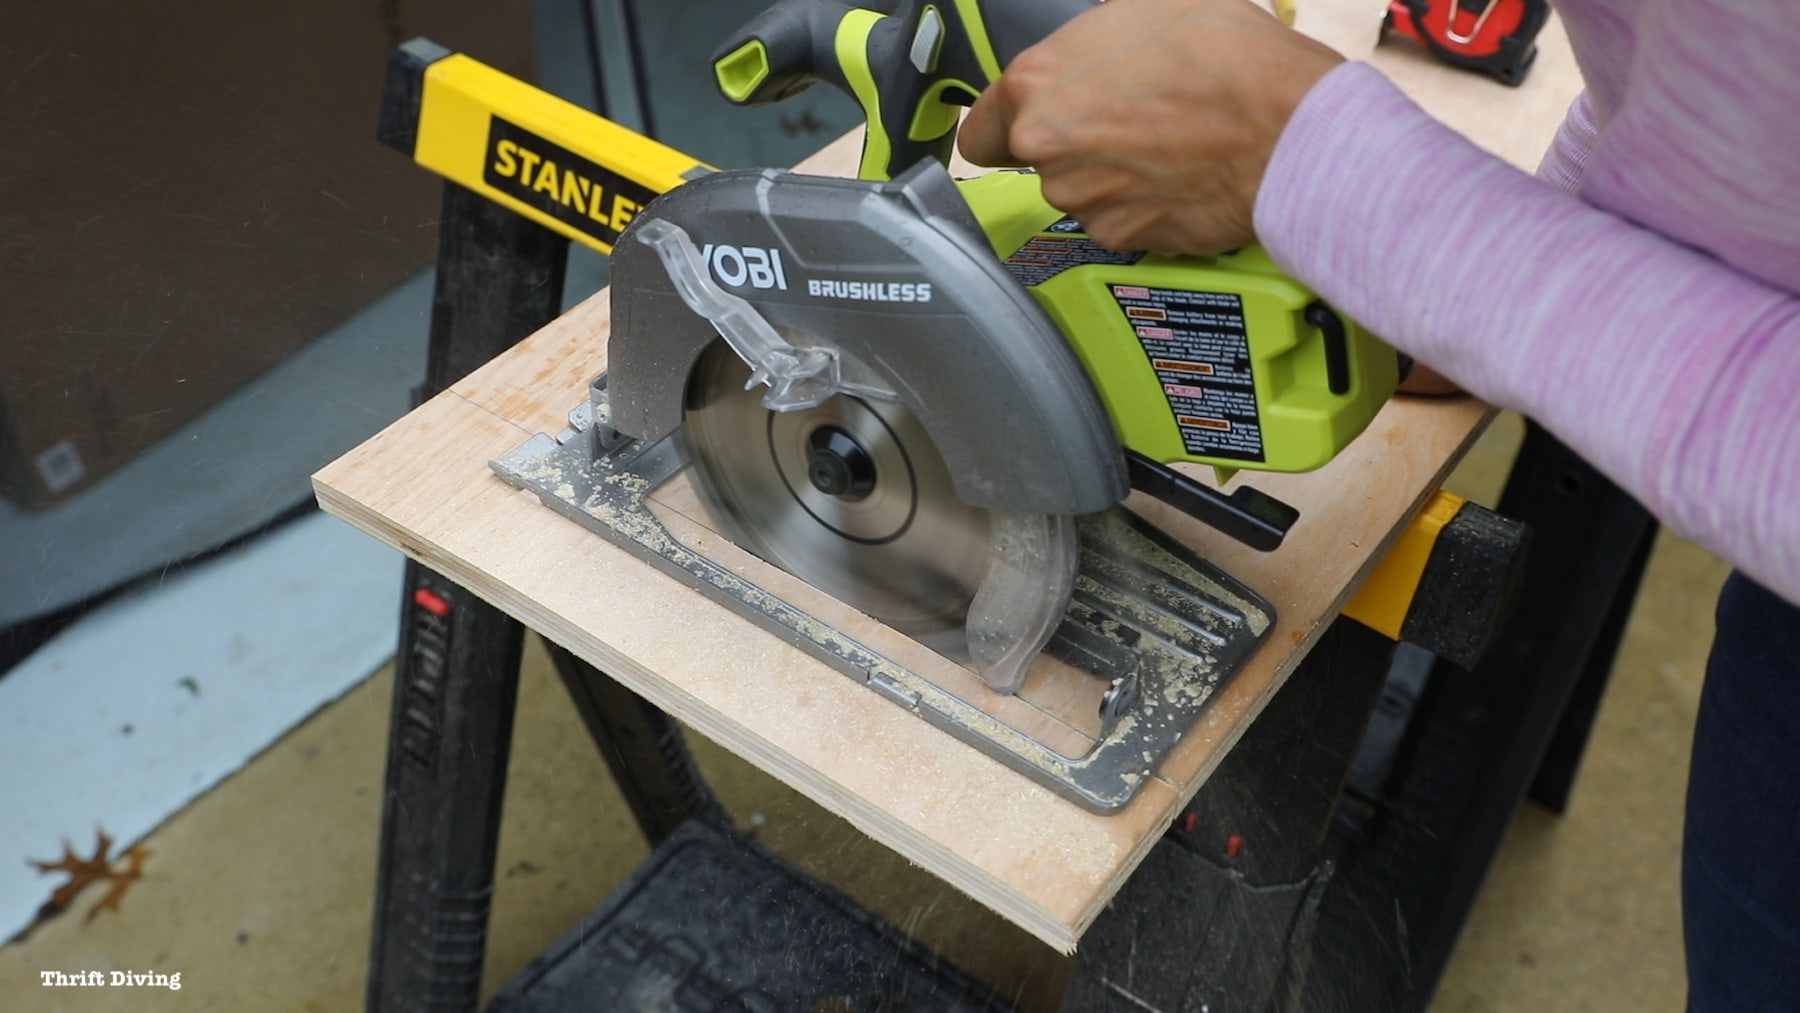 How to Use a Circular Saw - Making straight cuts with a circular saw. - Thrift Diving